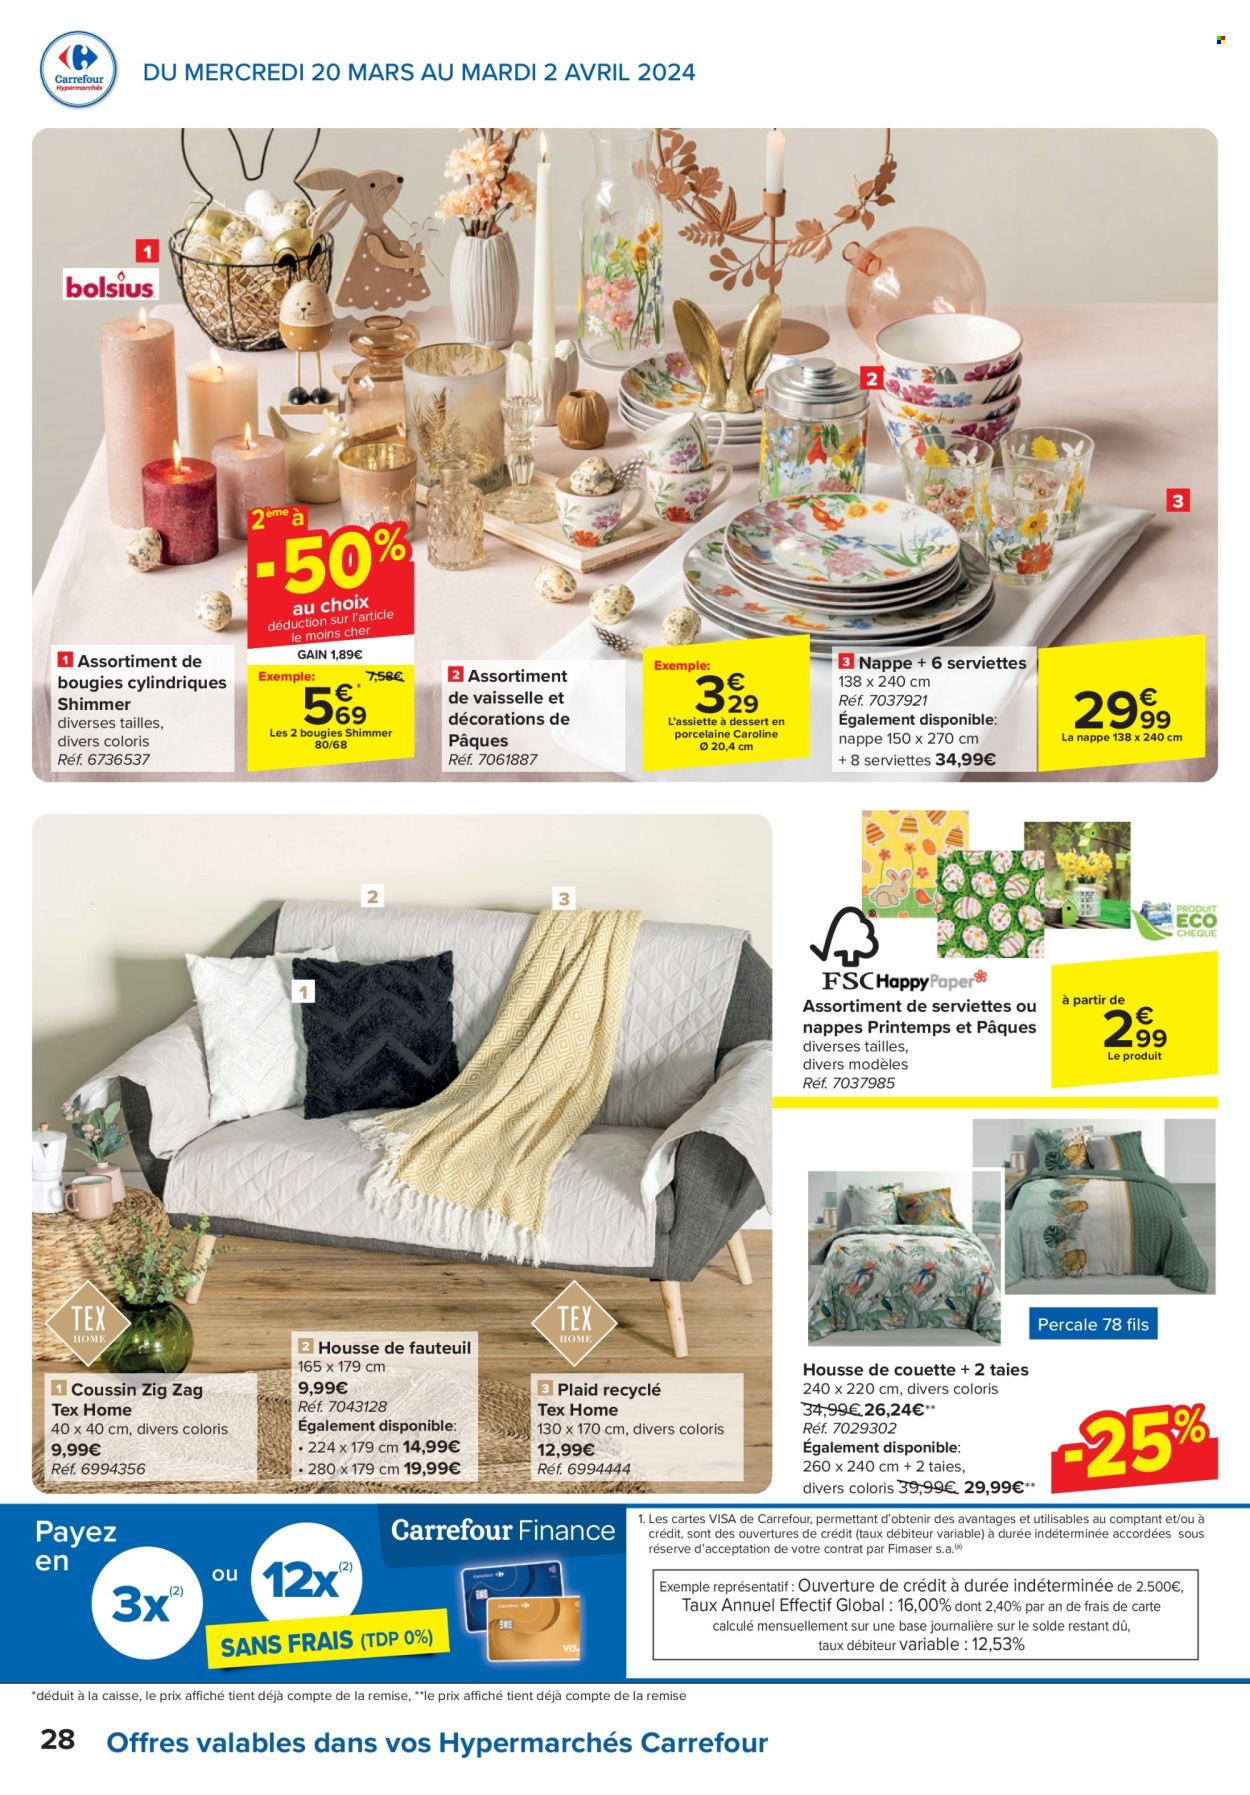 Catalogue Carrefour hypermarkt - 20.3.2024 - 2.4.2024. Page 28.